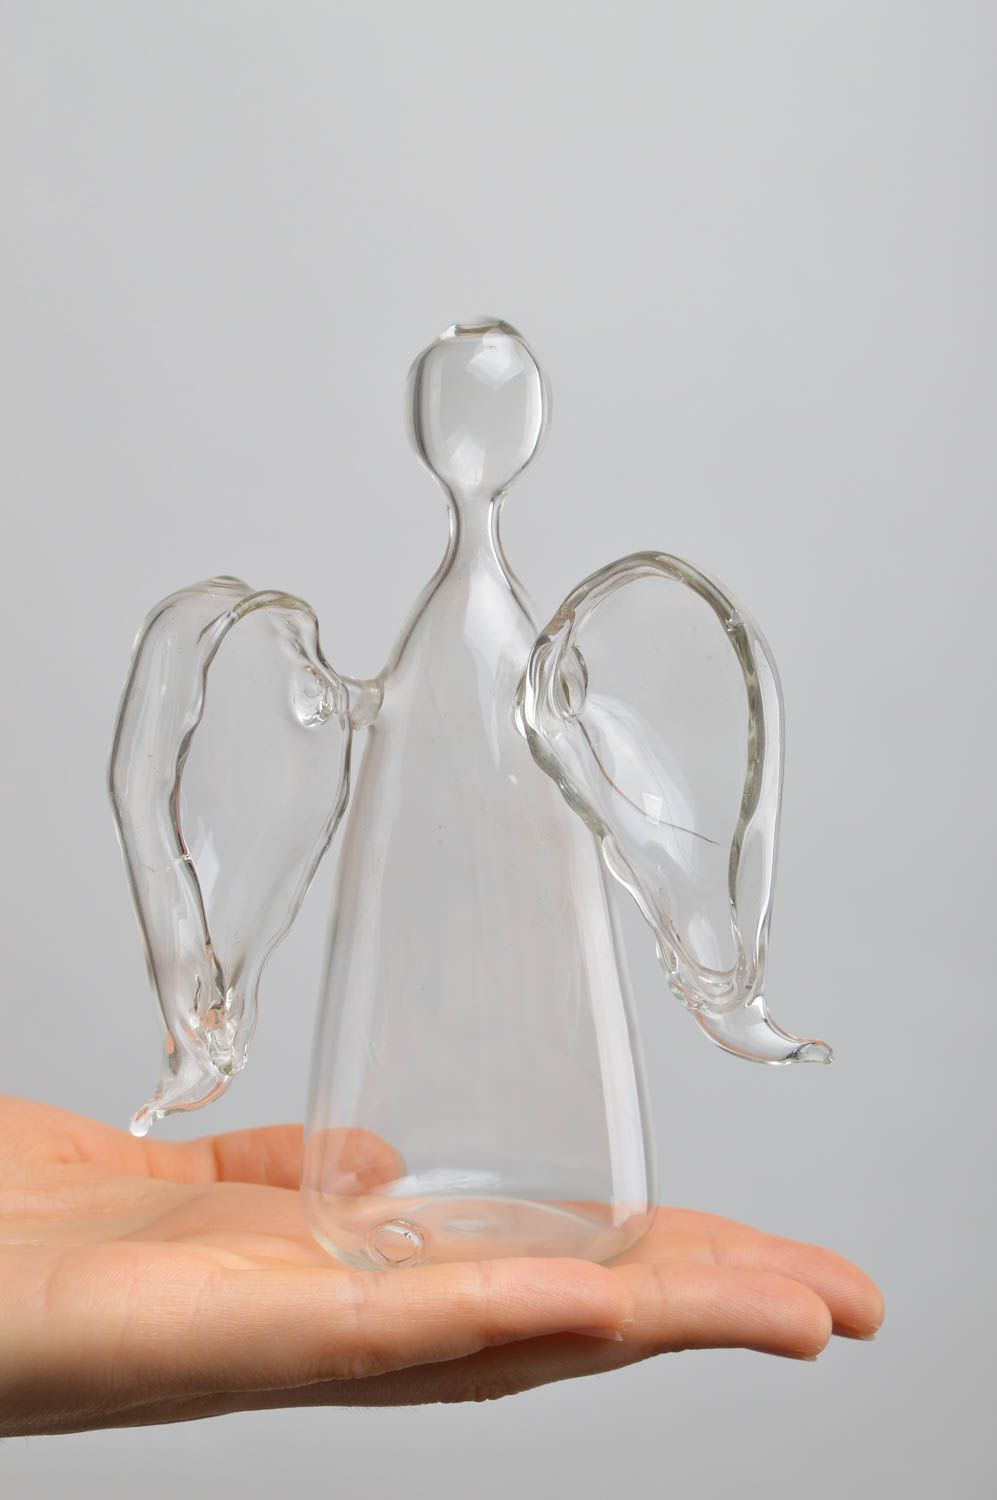 Handmade home decor glass figurine glass art for decorative use only cool gifts photo 5